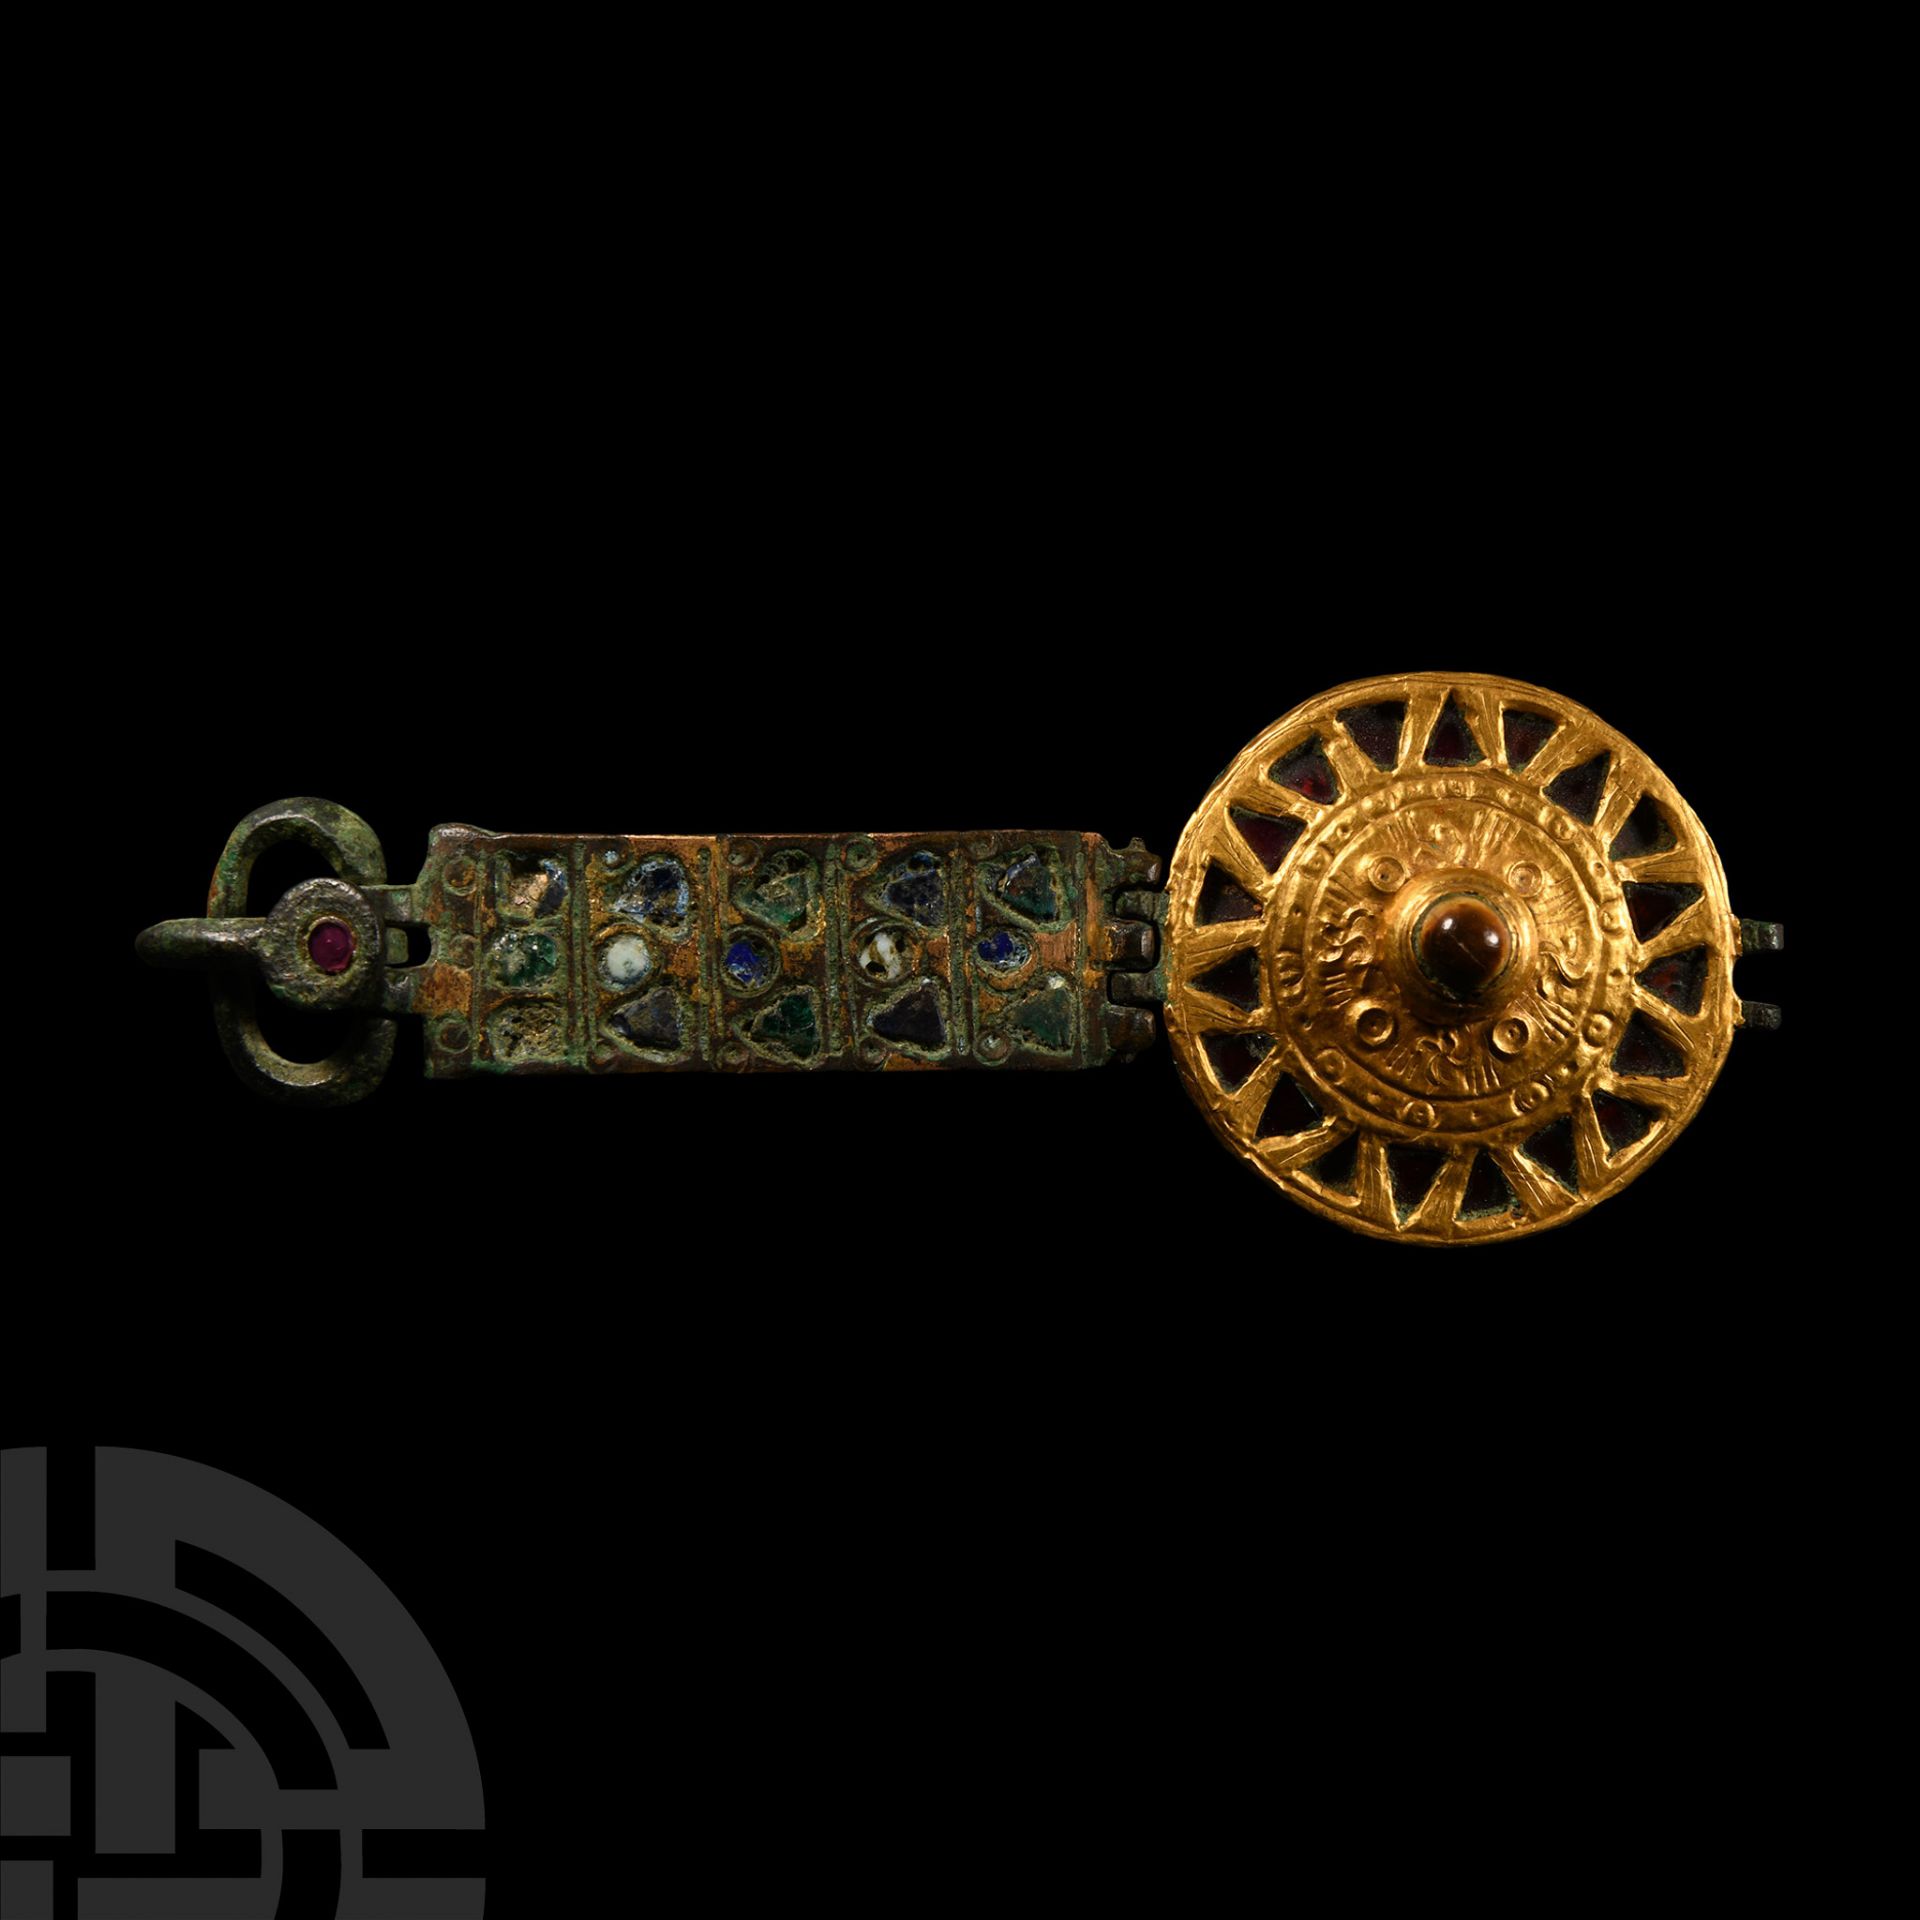 Merovingian Bronze Harness Buckle with Gold and Garnet Inlays